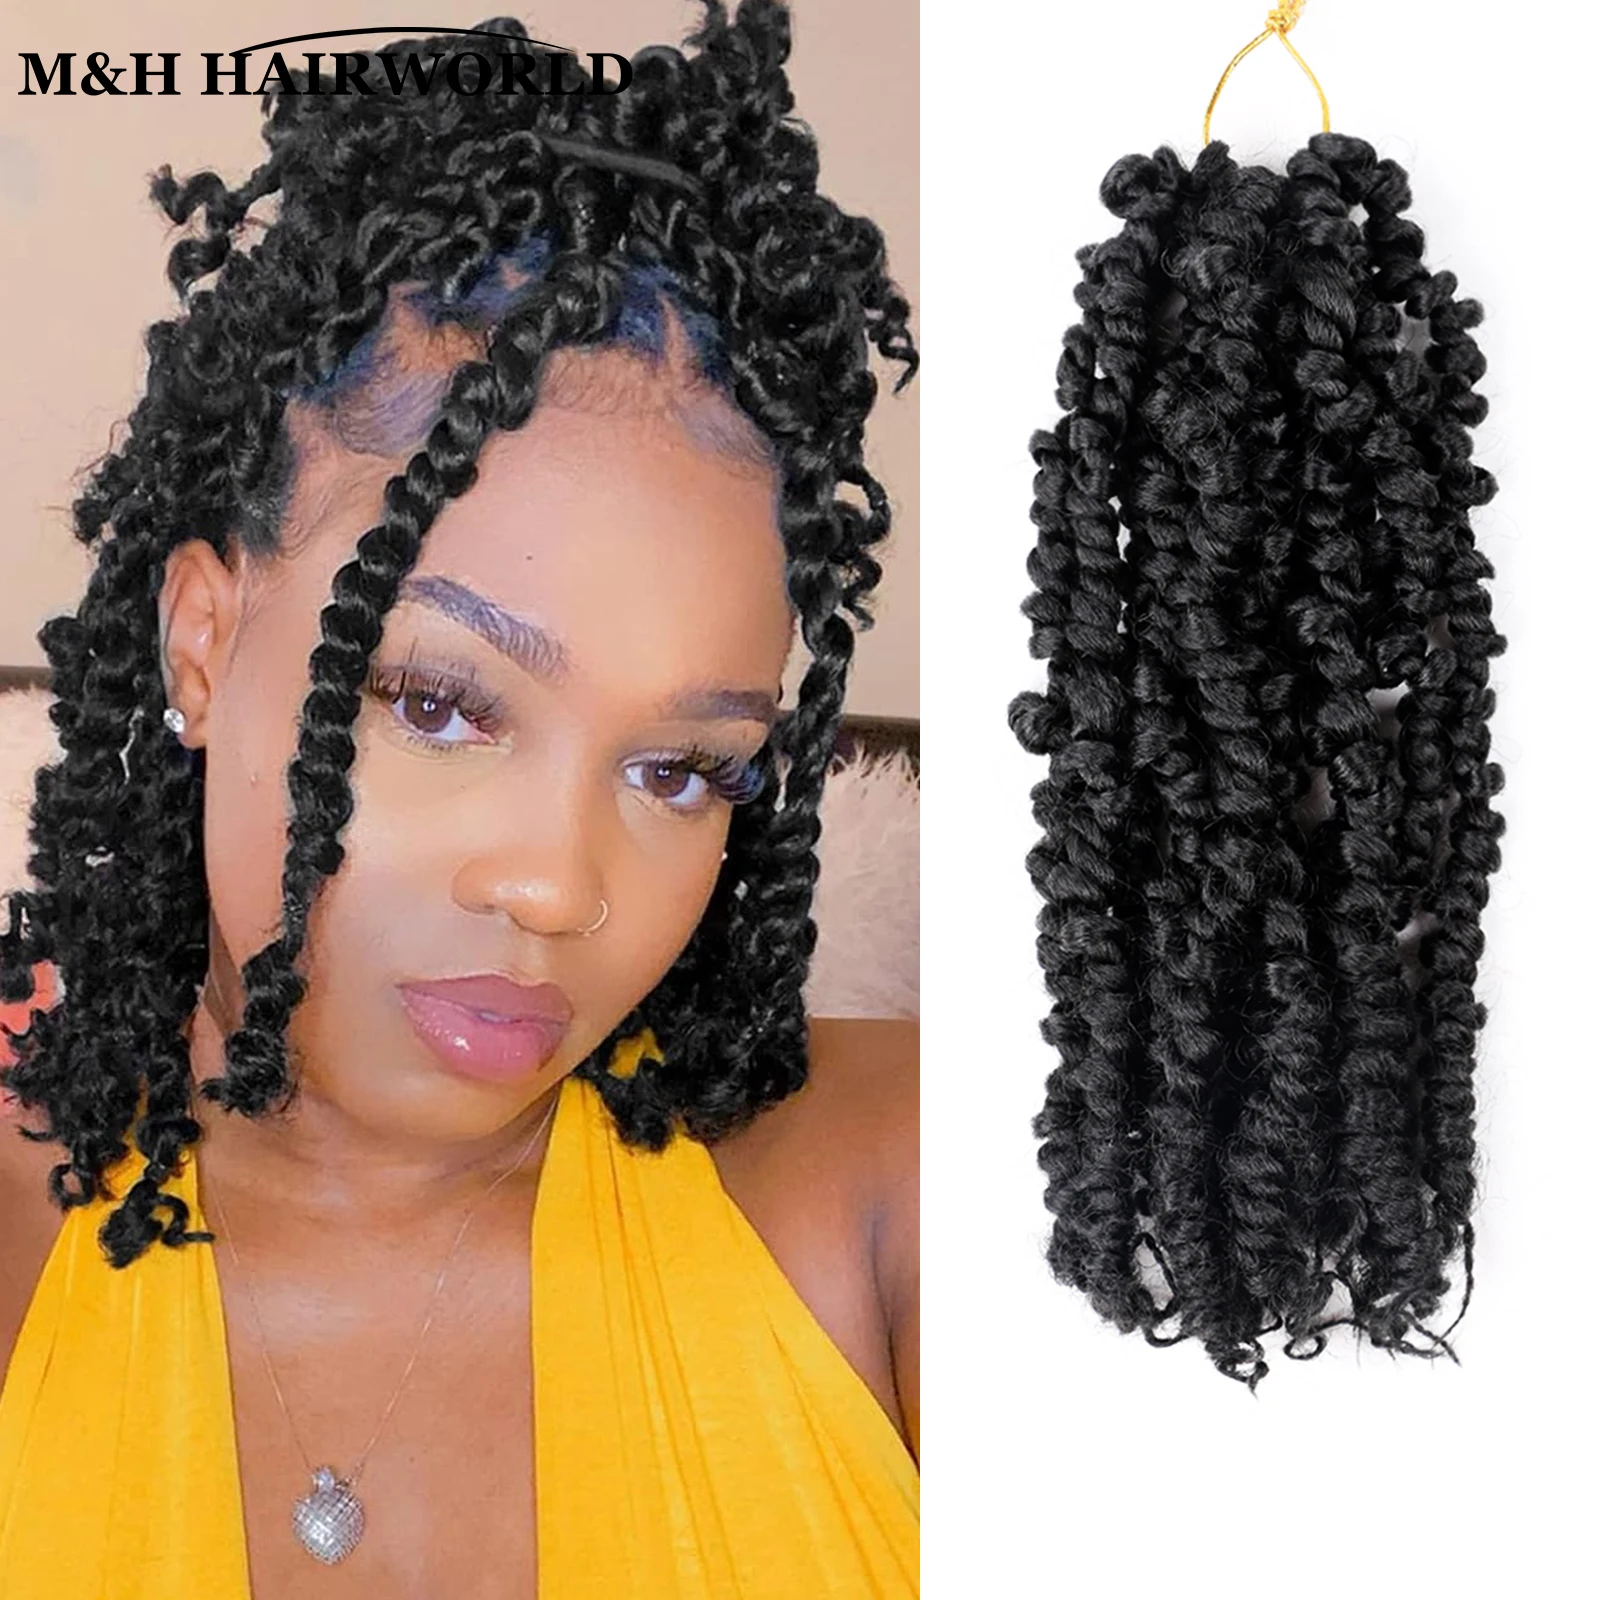 

Black Color Passion Twist Hair Short Crochet Braids Hair 10 Inch Ombre Blonde Brown Synthetic Braiding Hair Extensions For Women